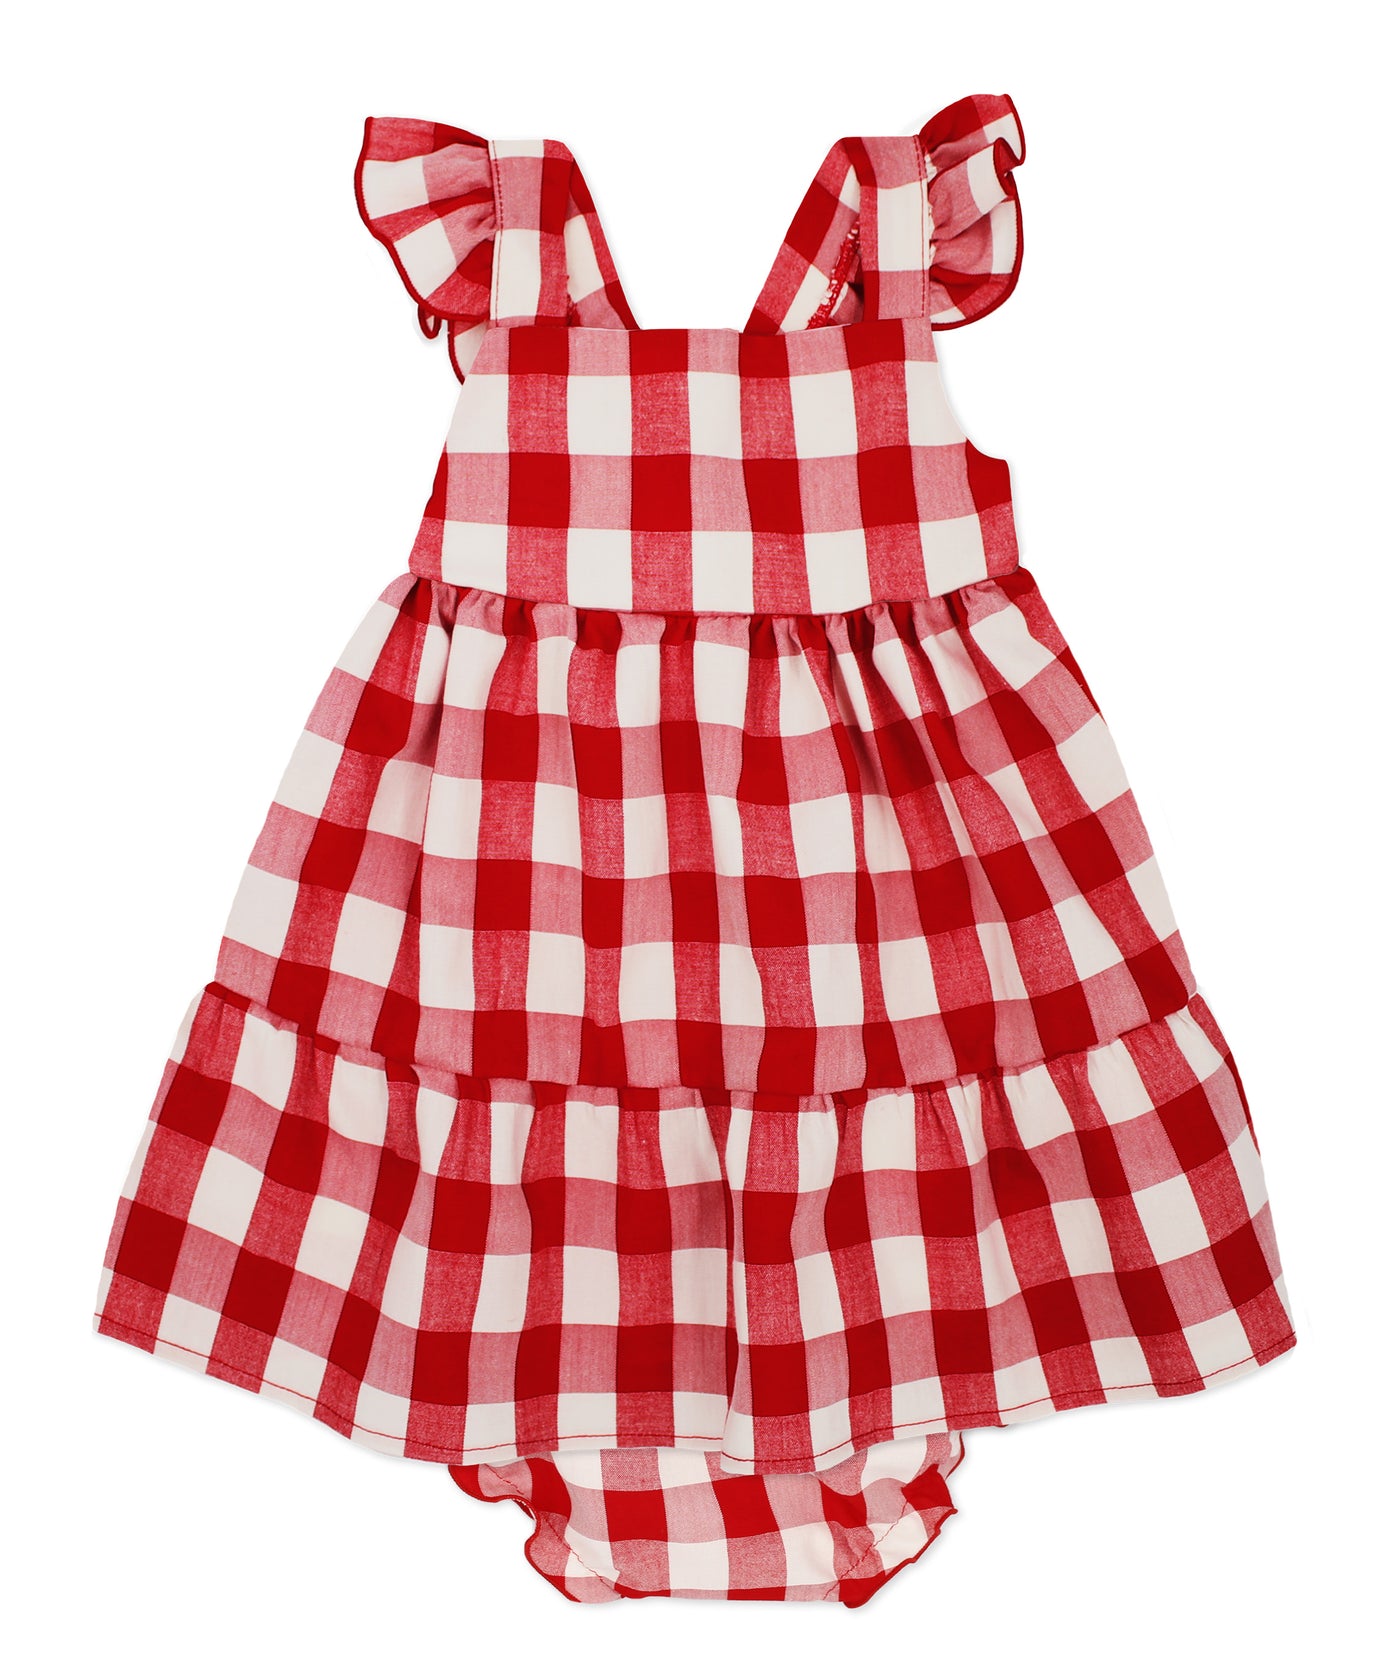 Red Gingham Dress and Bloomers by Rapife